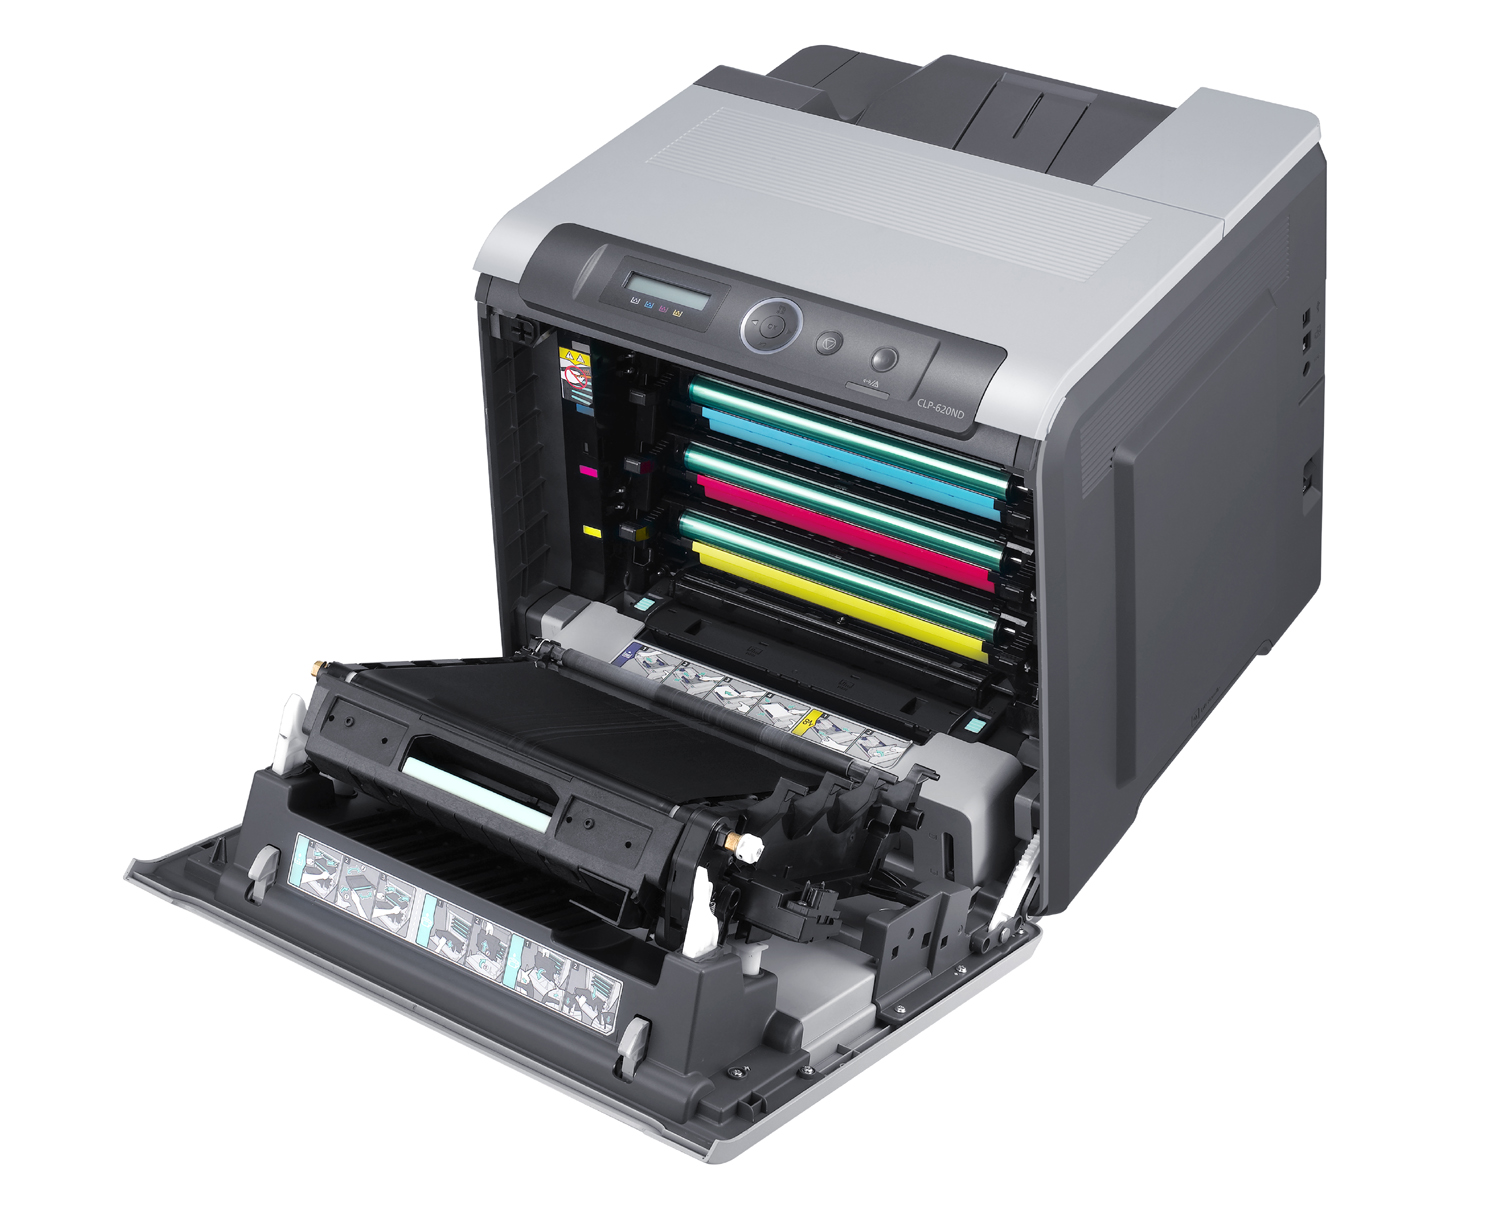 How-to-refill-color-laser-cartridge-step0.jpg